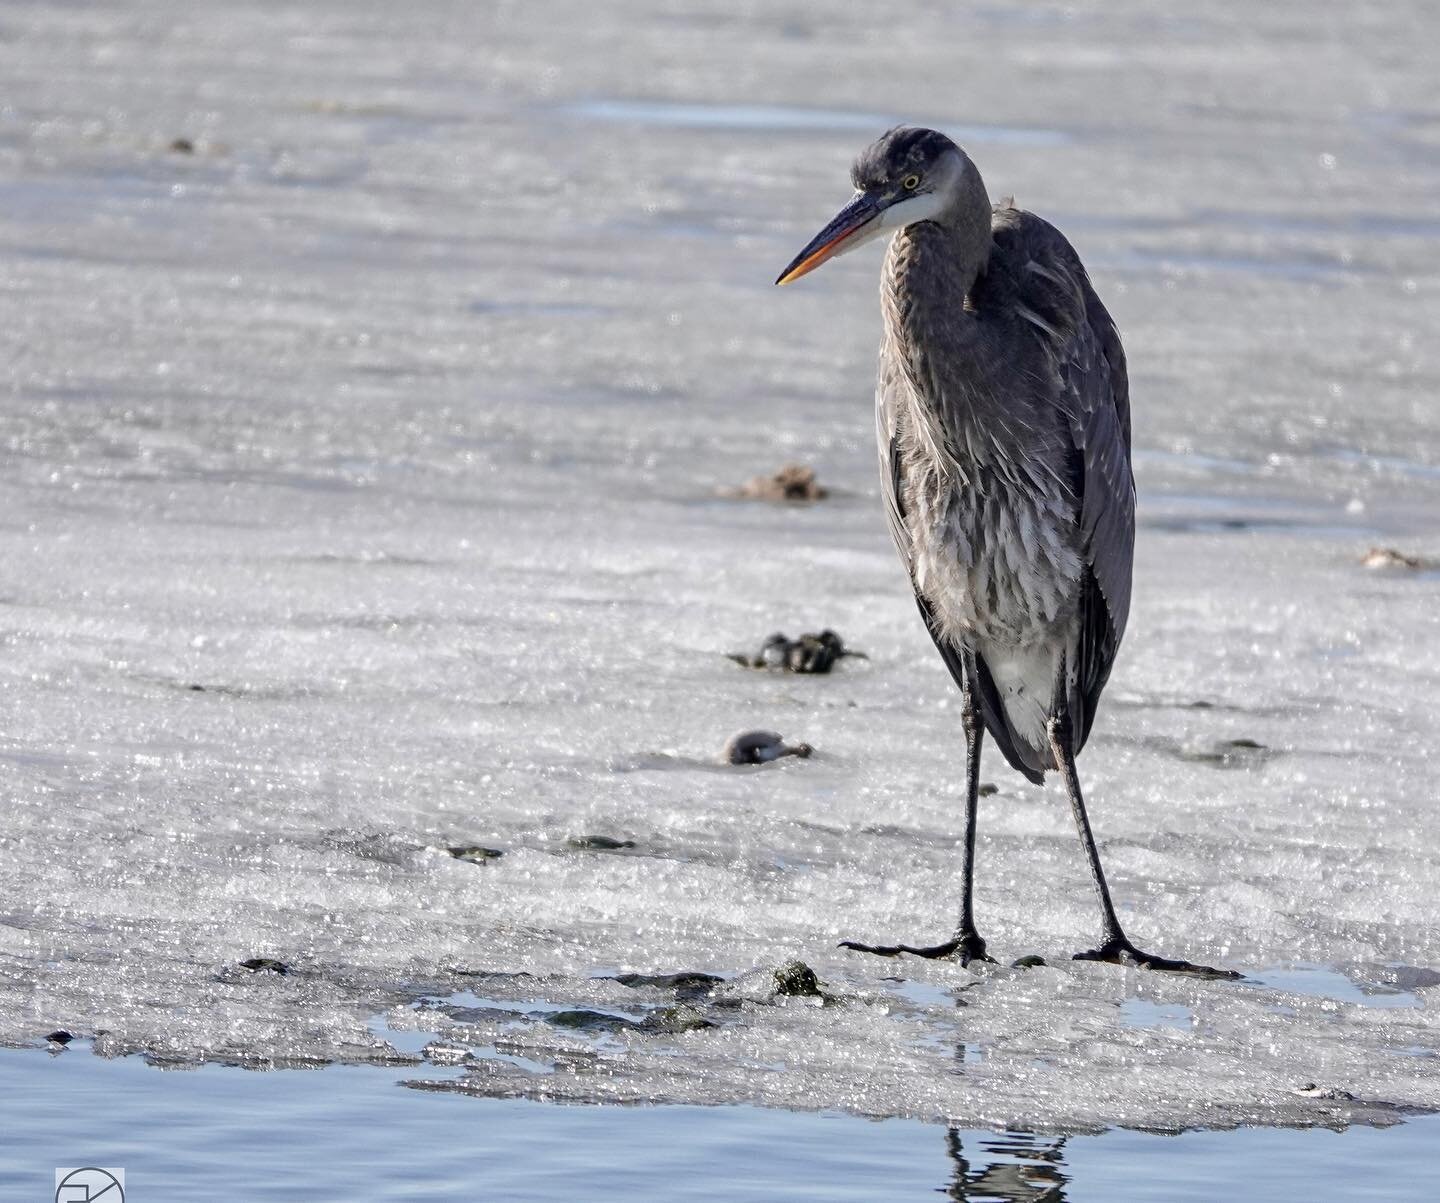 Great Blue Heron on the icy water&rsquo;s edge at Spring Creek Marina. He stepped on a thin spot and slipped in. #greatblueherons #greatblueheron #hereforthestills #sonyrx10iv